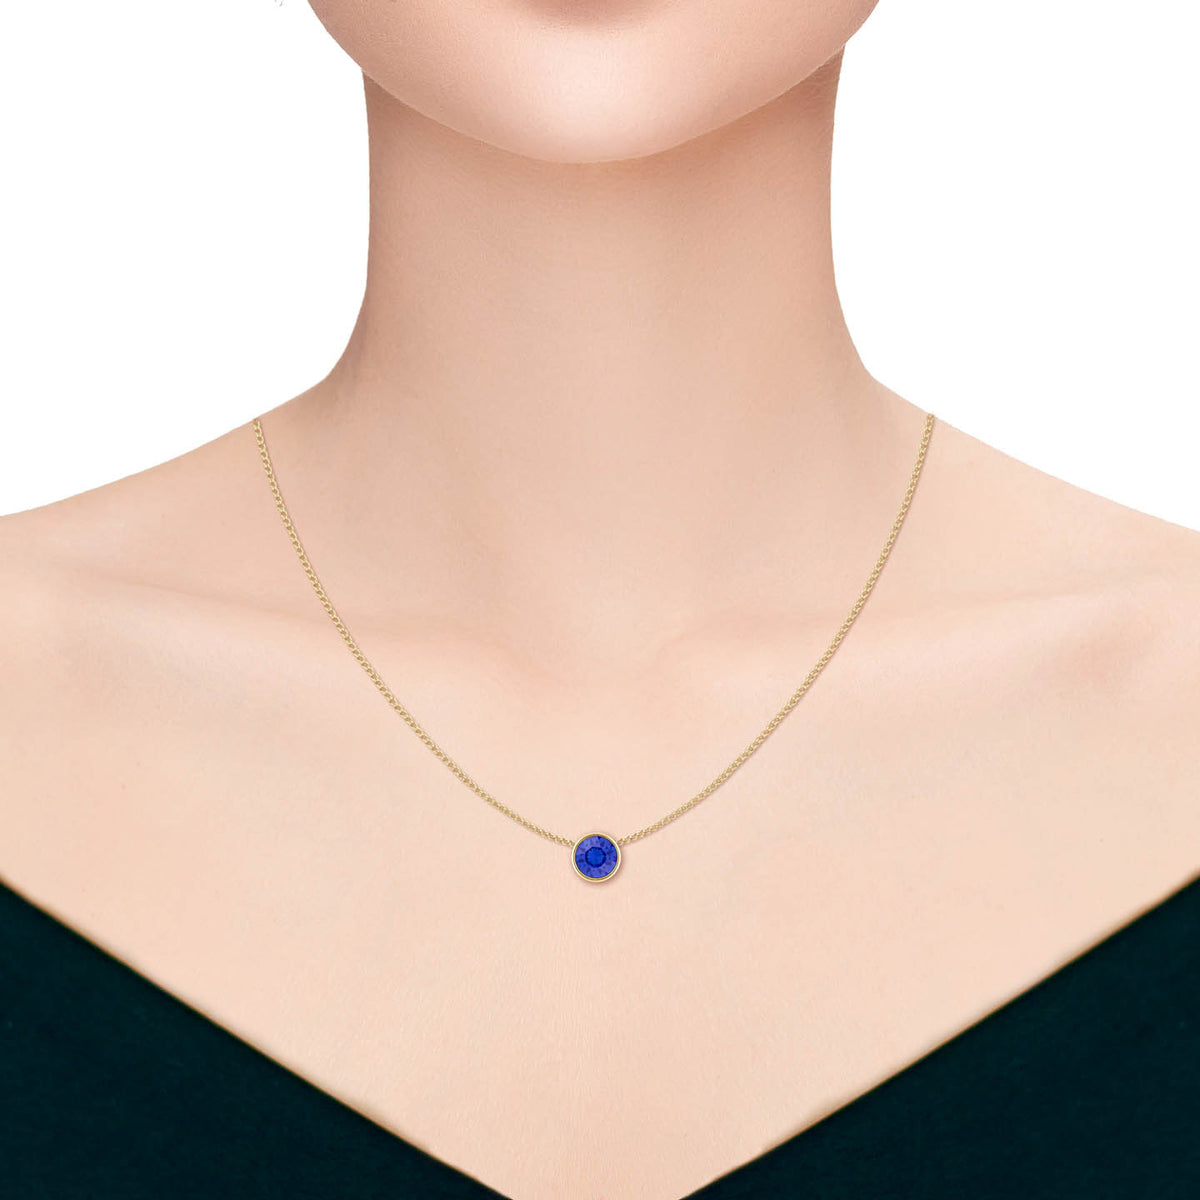 Harley Small Pendant Necklace with Blue Sapphire Round Crystals from Swarovski Gold Plated - Ed Heart